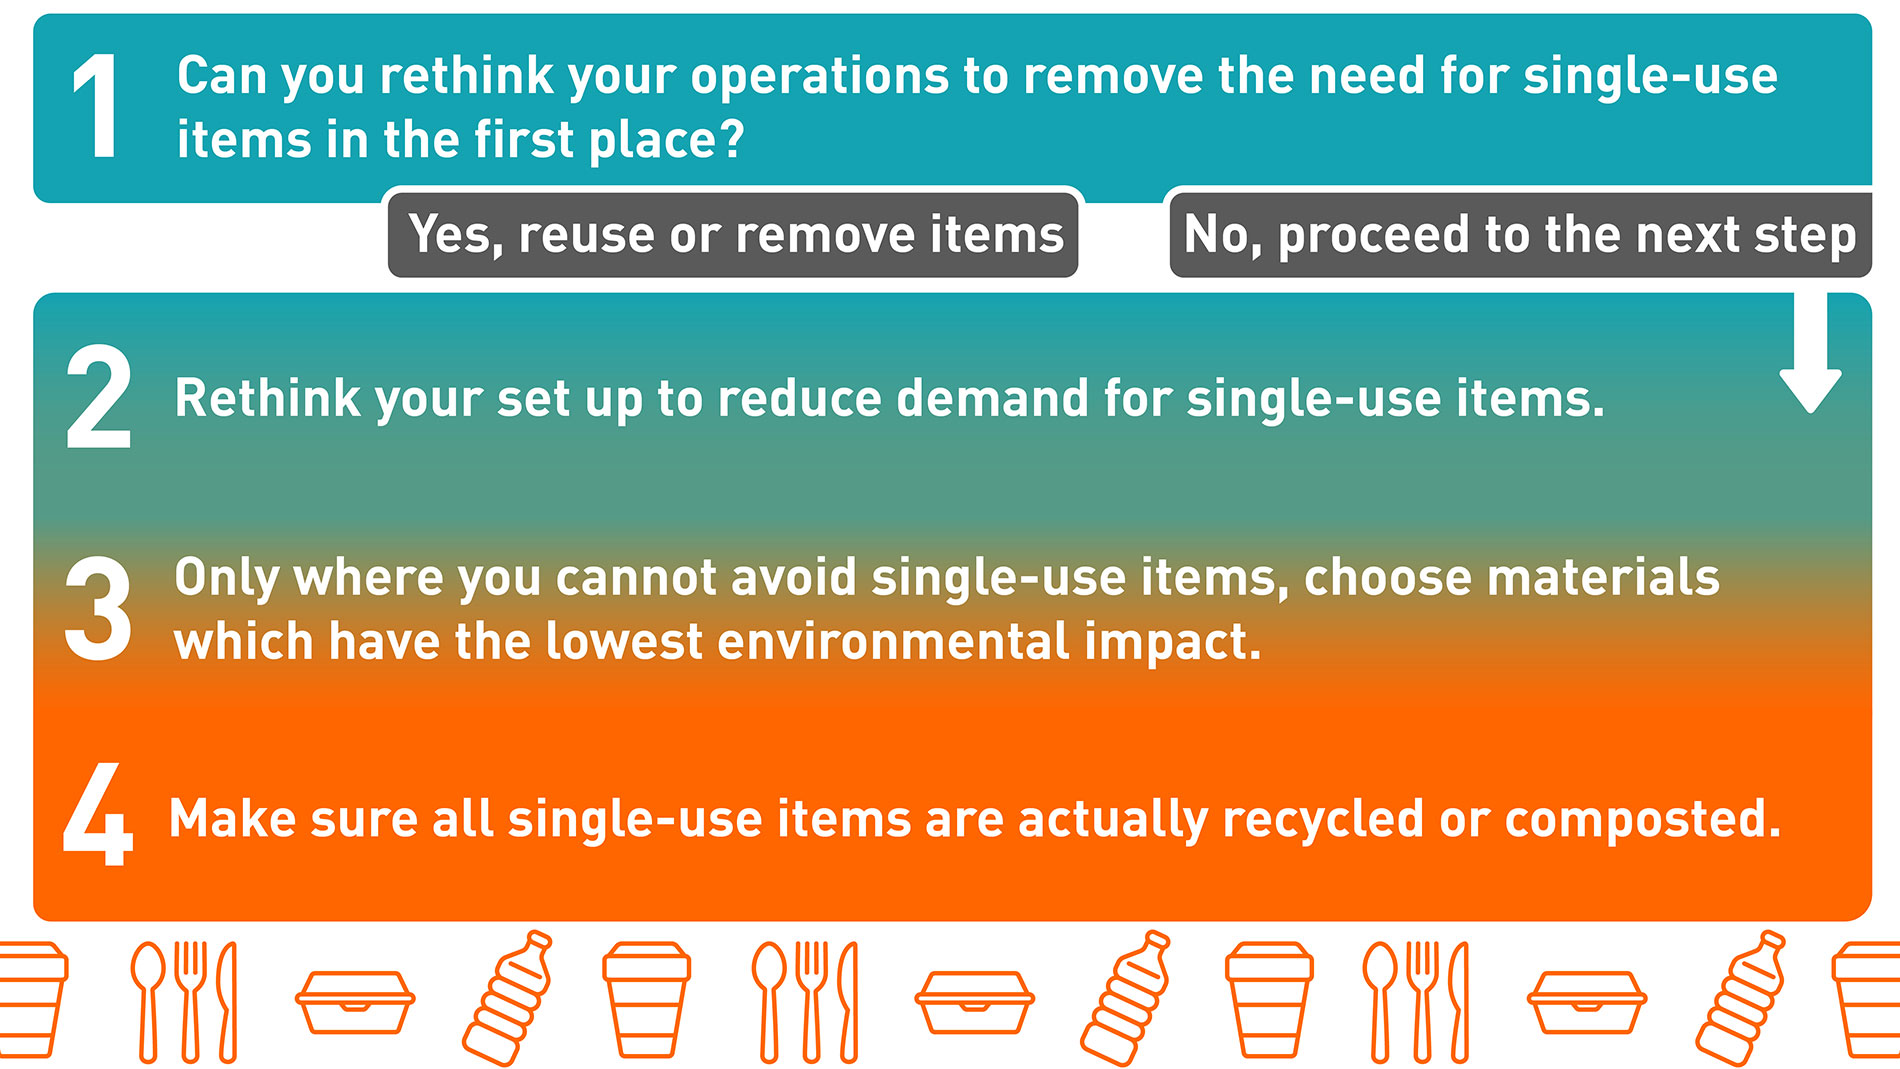 Making more sustainable choices: moving away from single-use